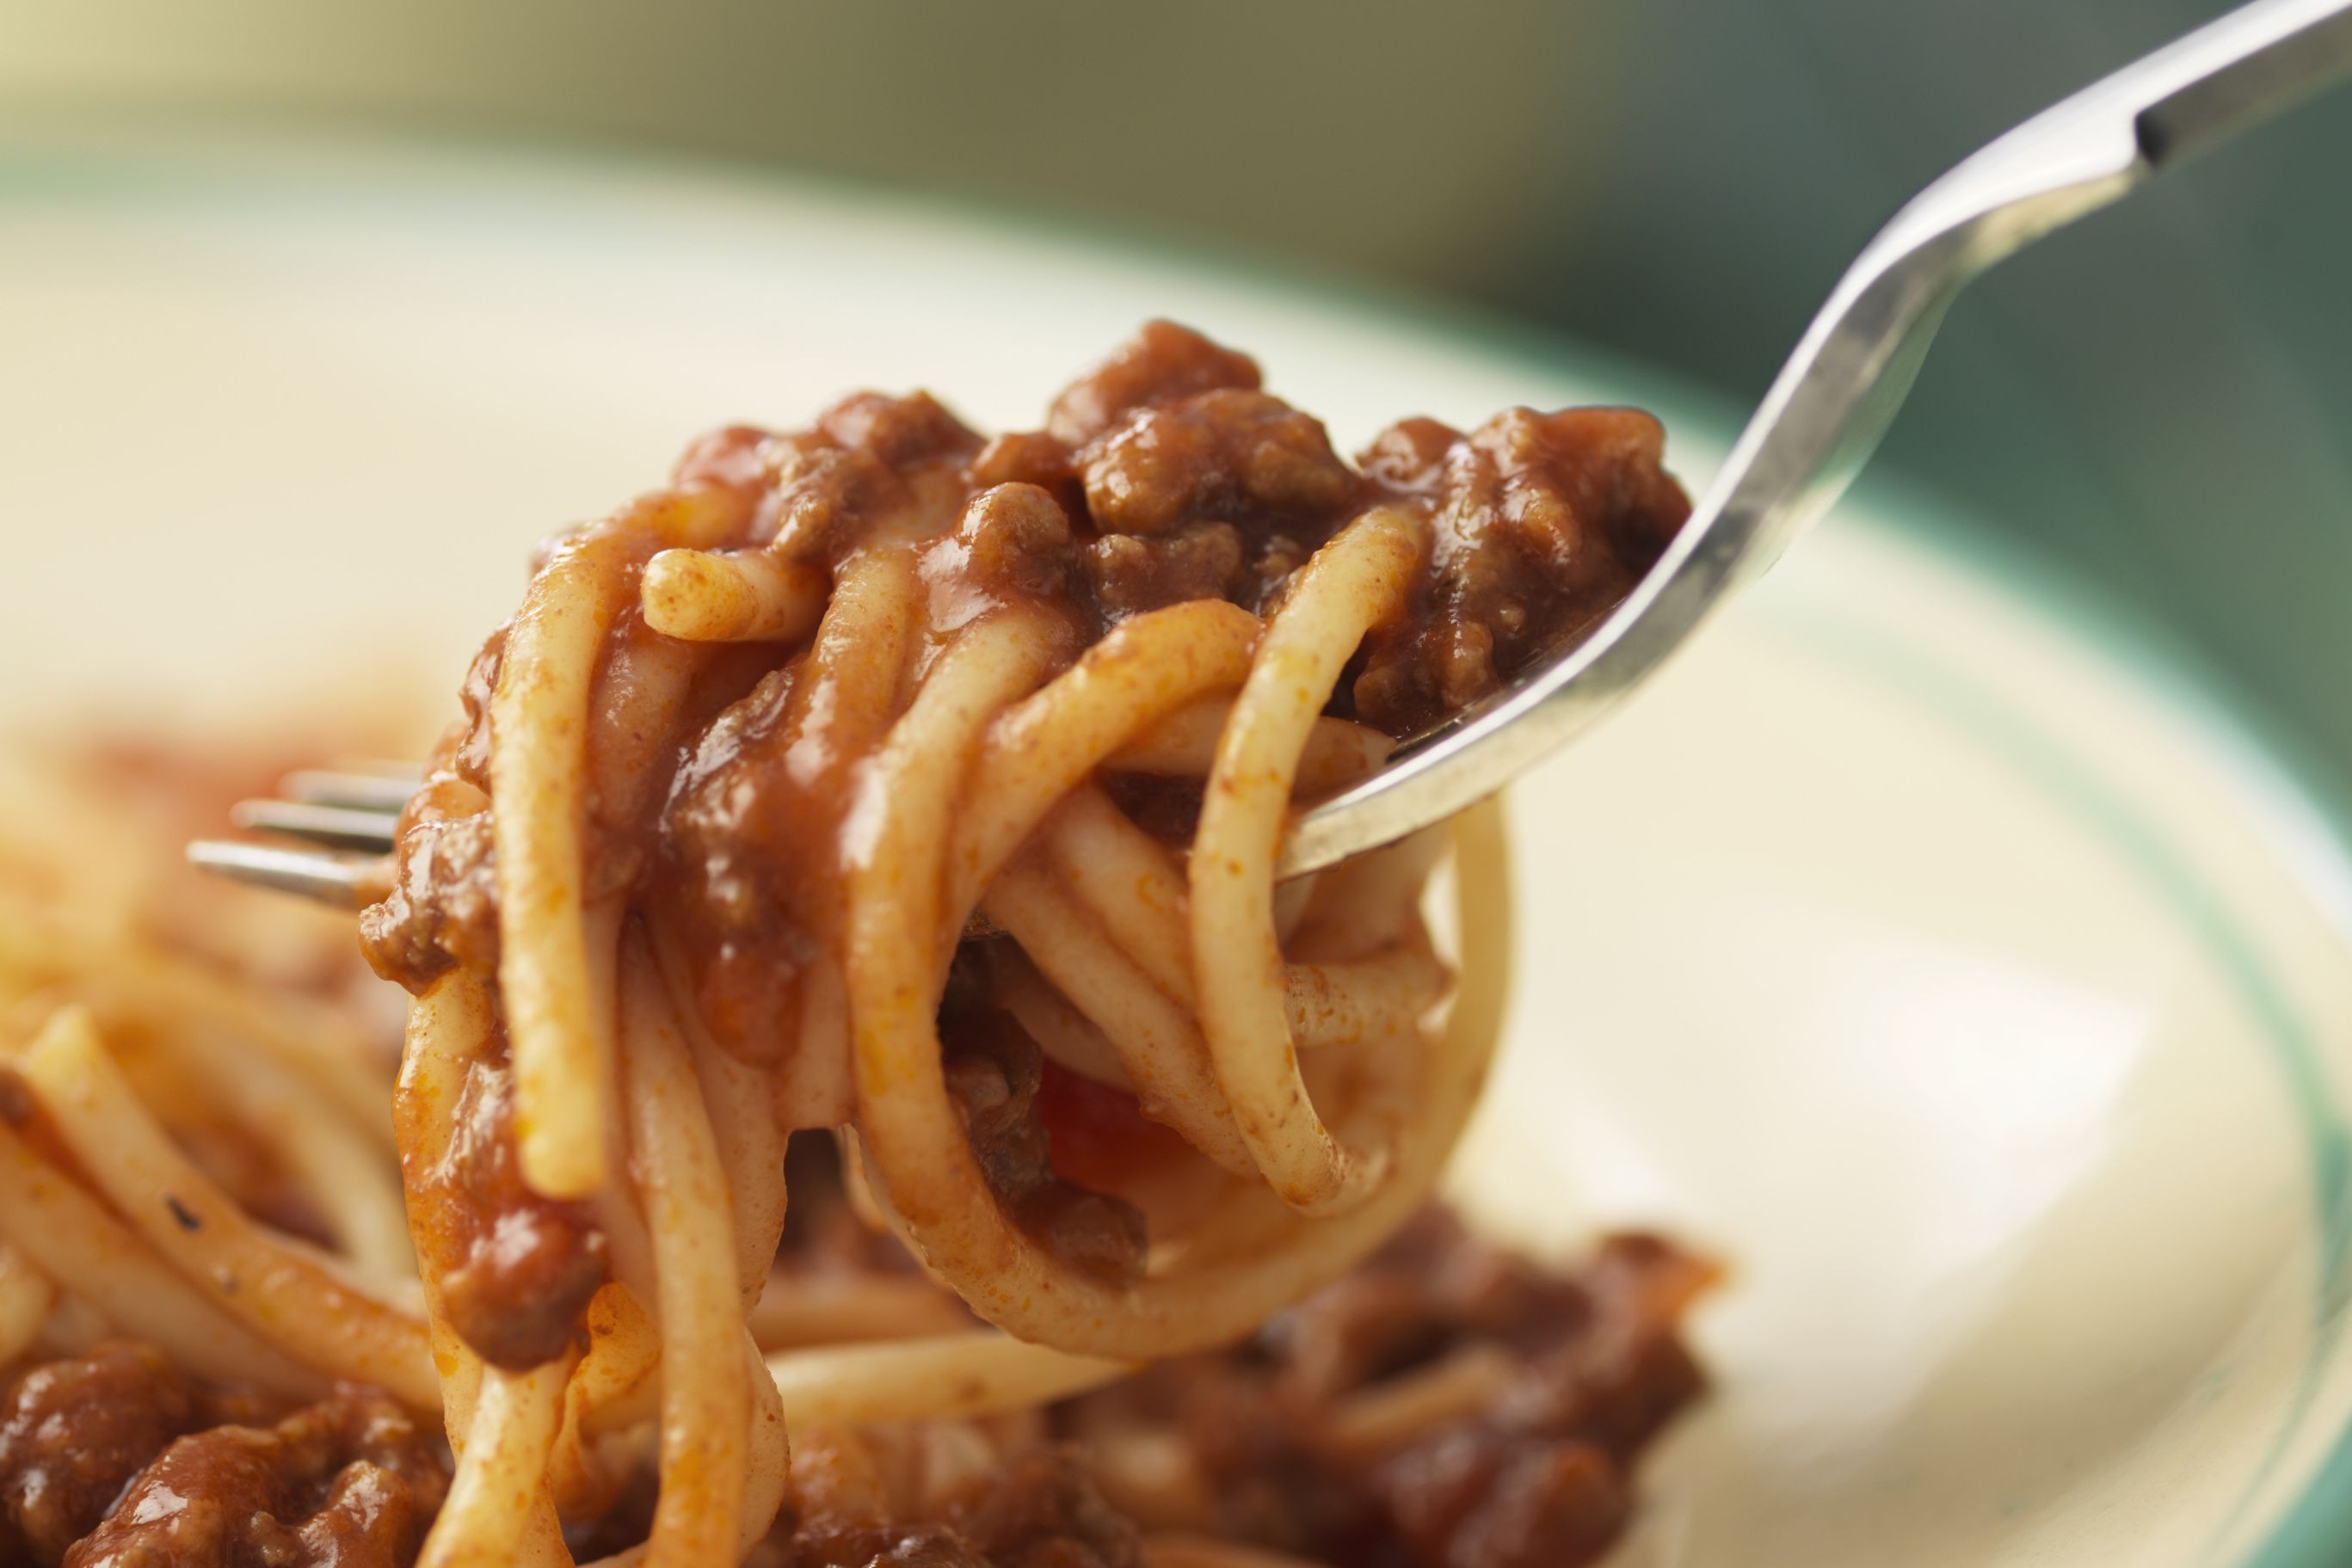 How To Make Spaghetti With Ground Beef
 Spaghetti Bake With Ground Beef and Cheese Recipe